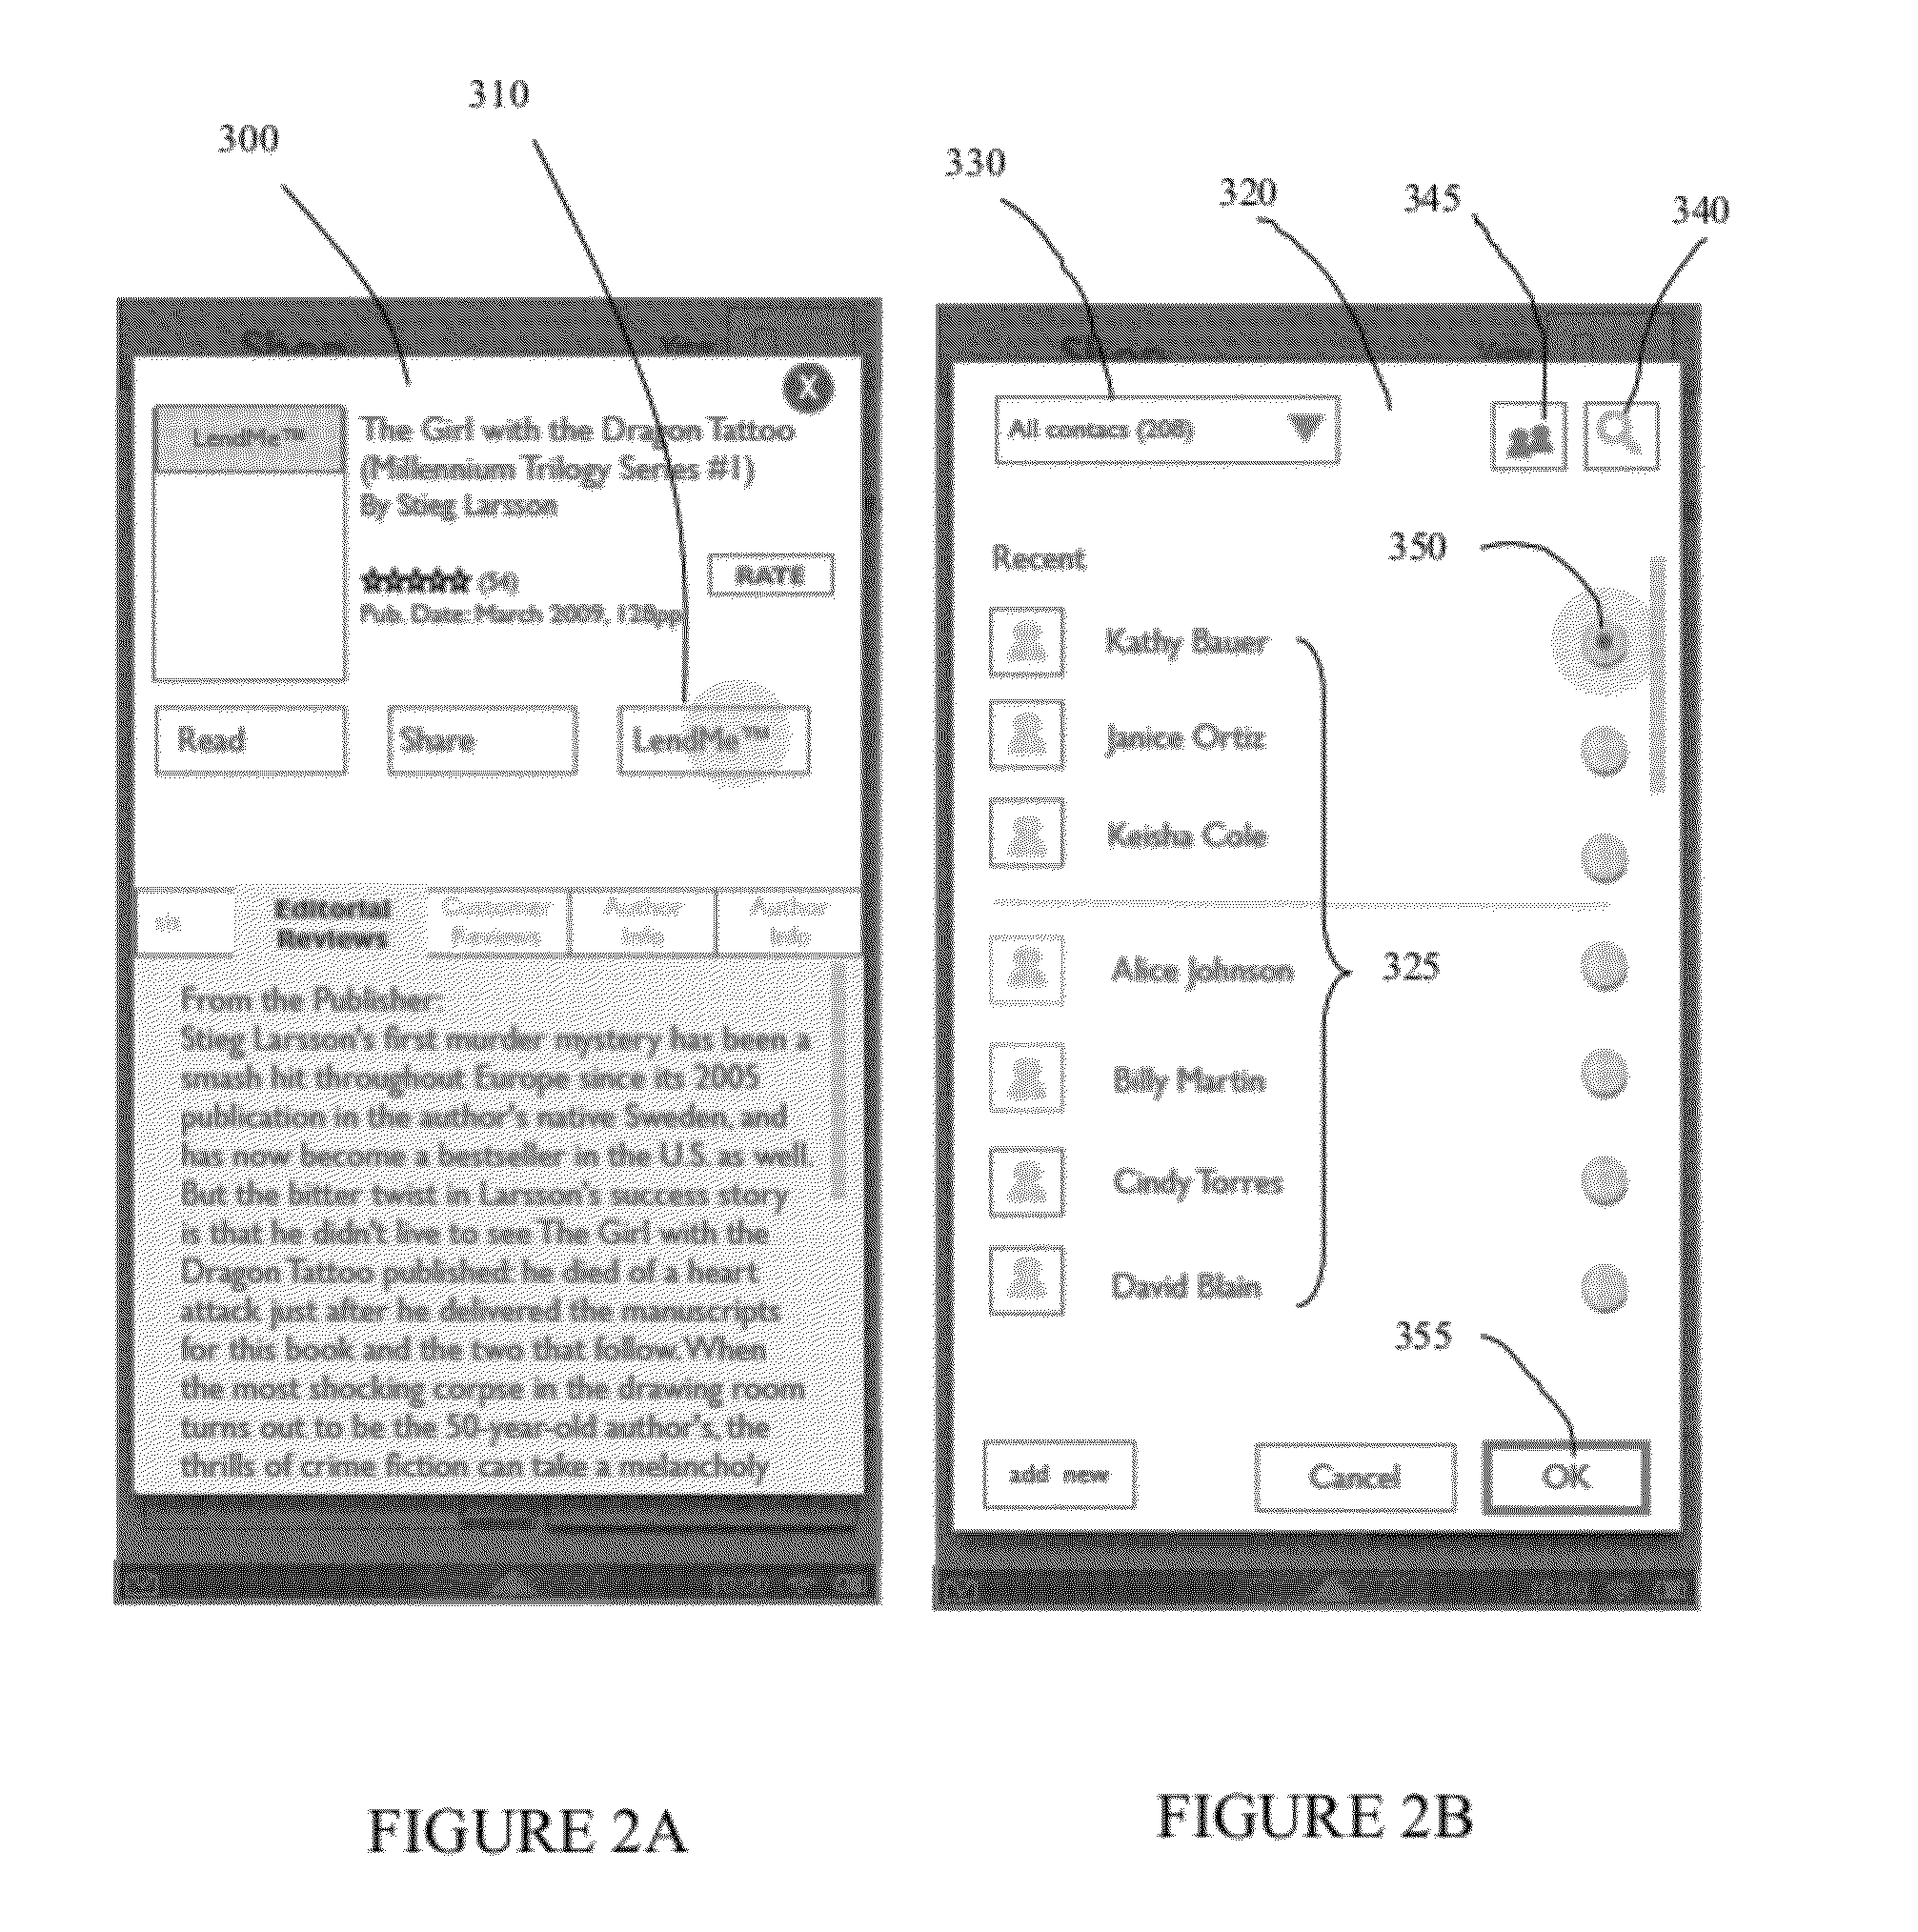 System and method for facilitating the lending of digital content using contacts lists